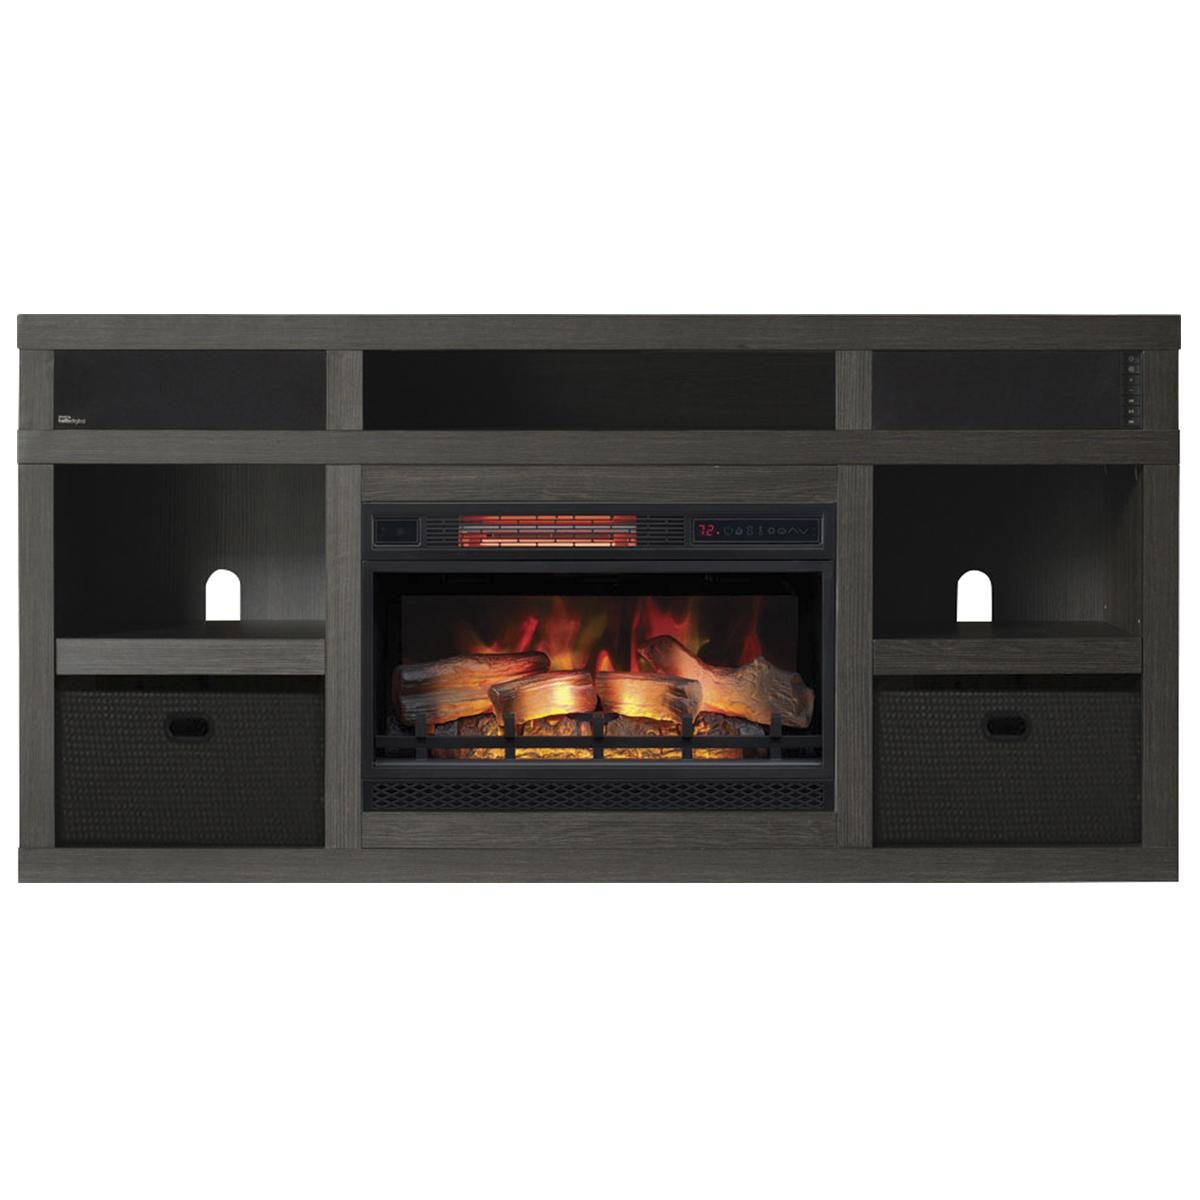 Fireplace Insert Frame Awesome Fabio Flames Greatlin 3 Piece Fireplace Entertainment Wall